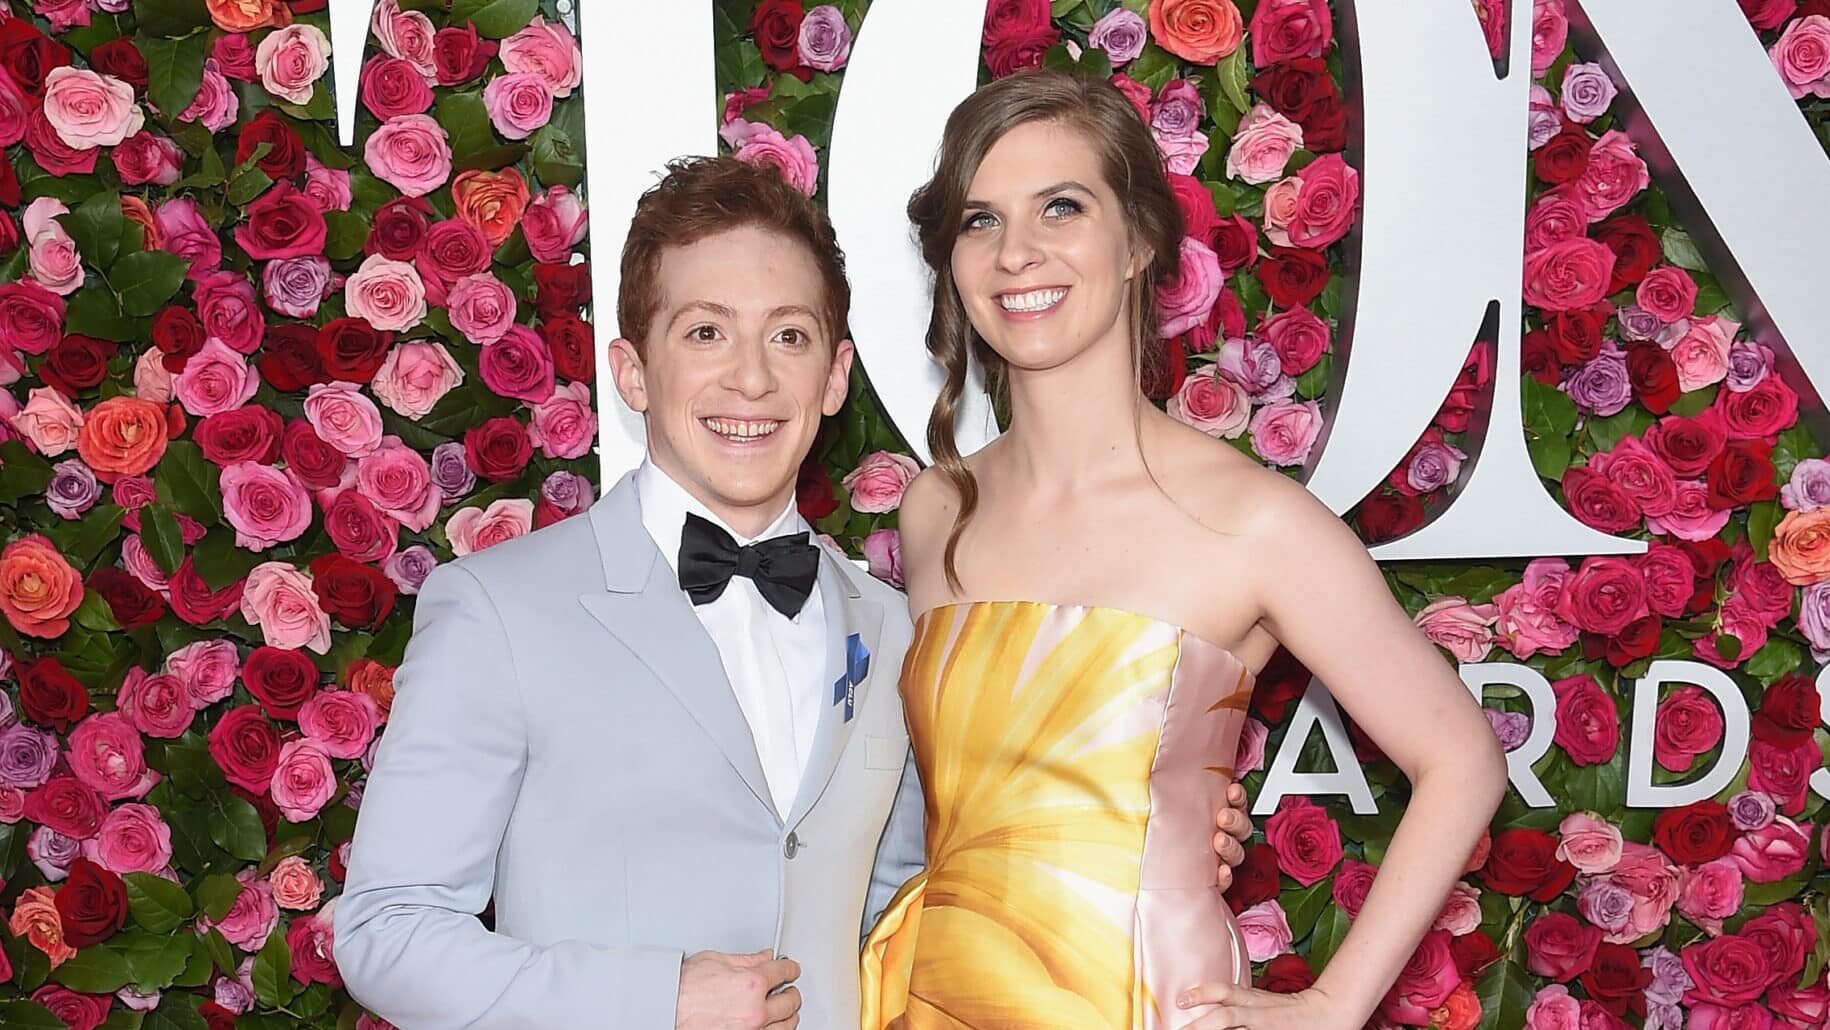 Ethan Slater (L) attends the 72nd Annual Tony Awards at Radio City Music Hall on June 10, 2018 in New York City.